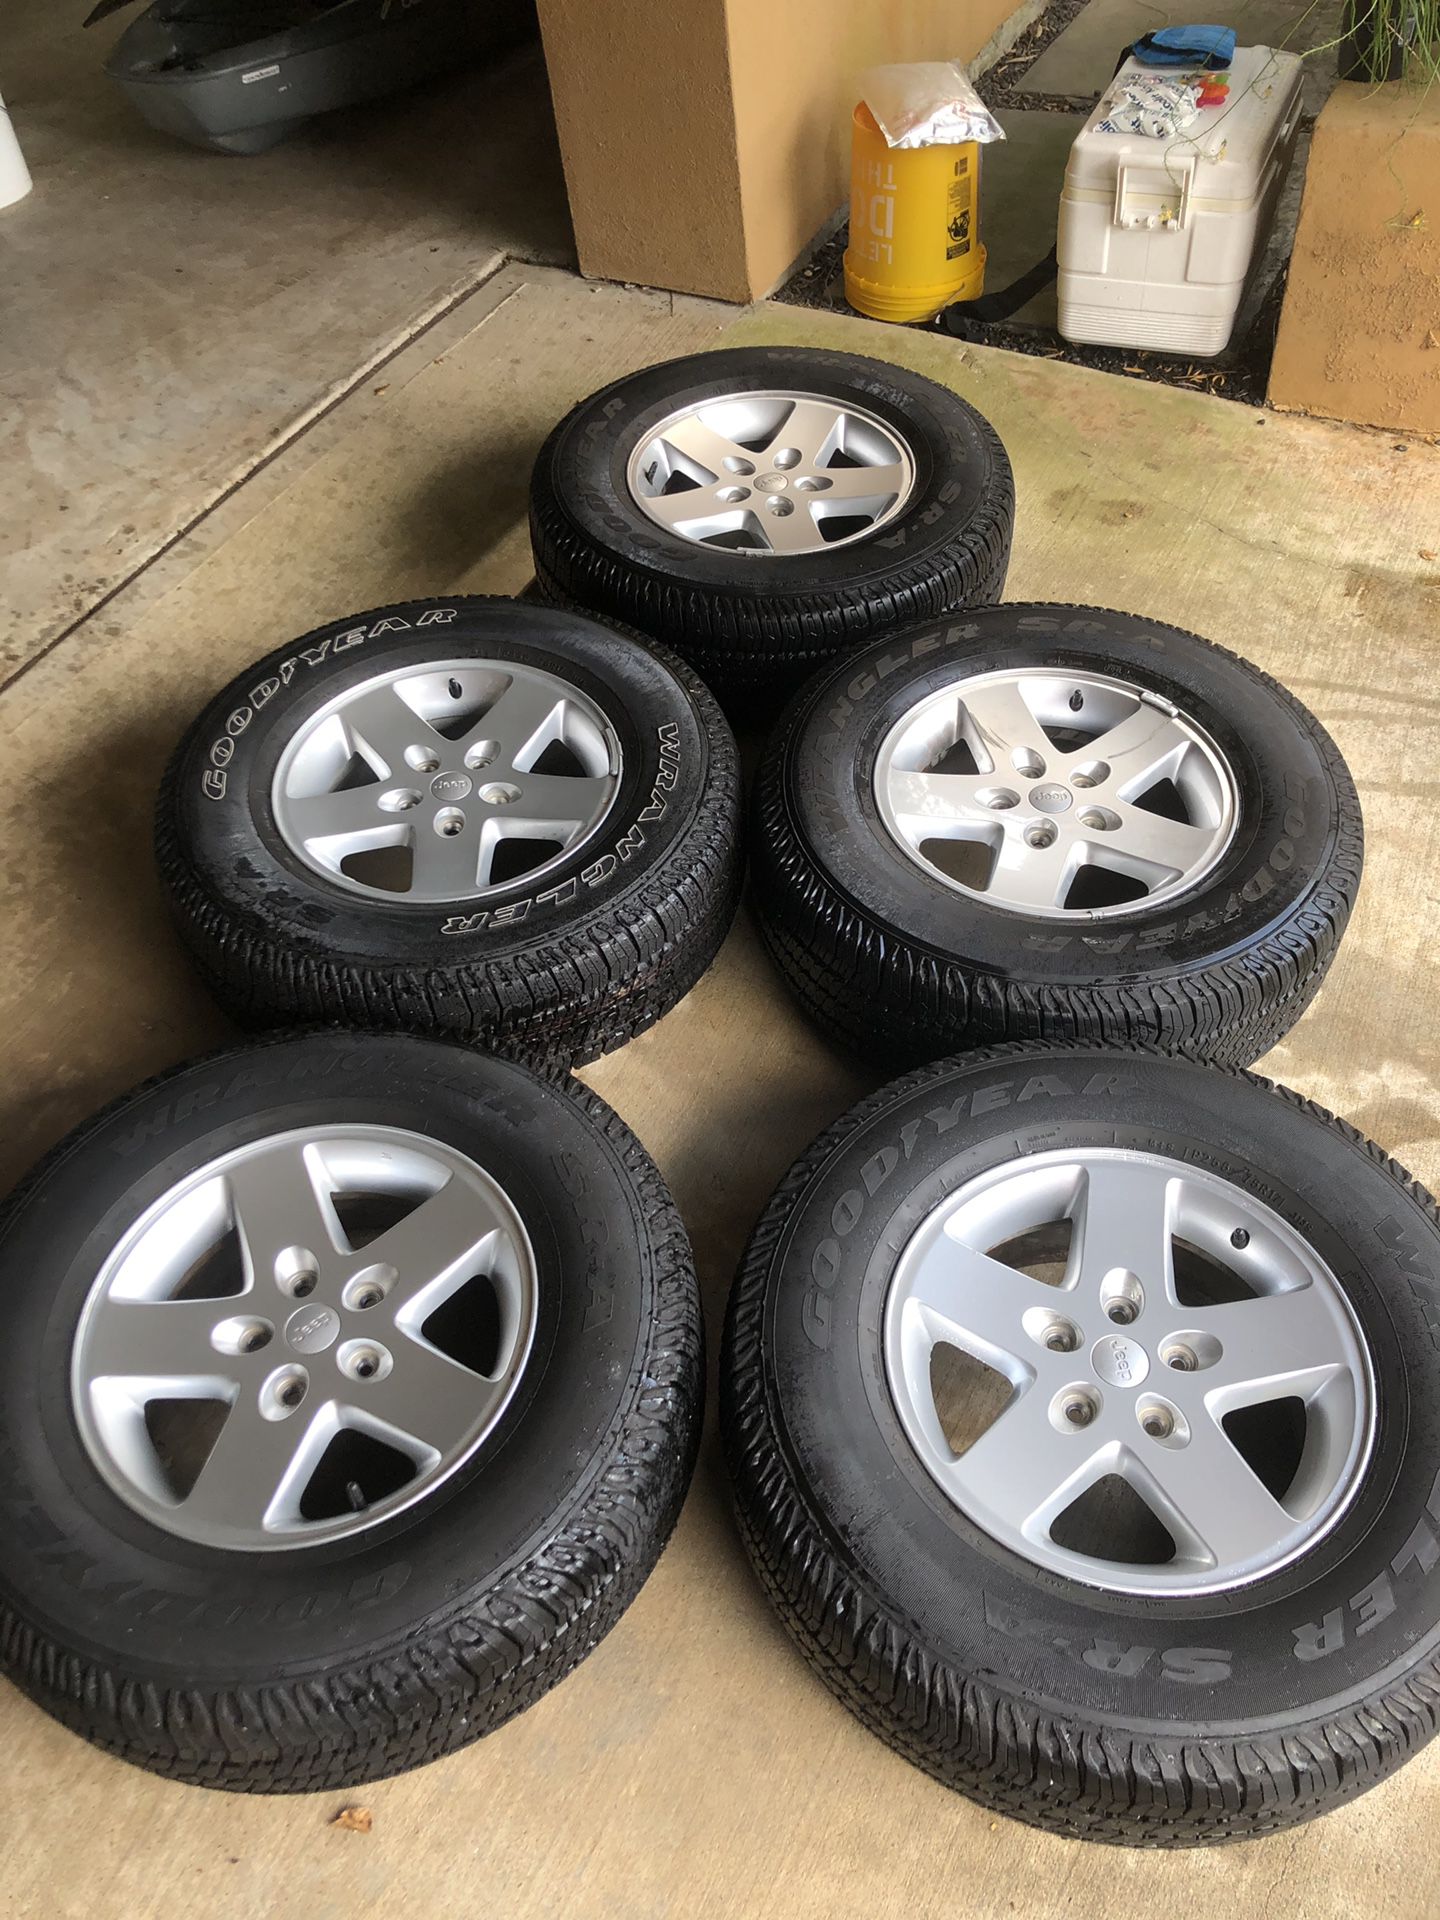 (5) 2016 Jeep Wrangler wheels and Goodyear tires